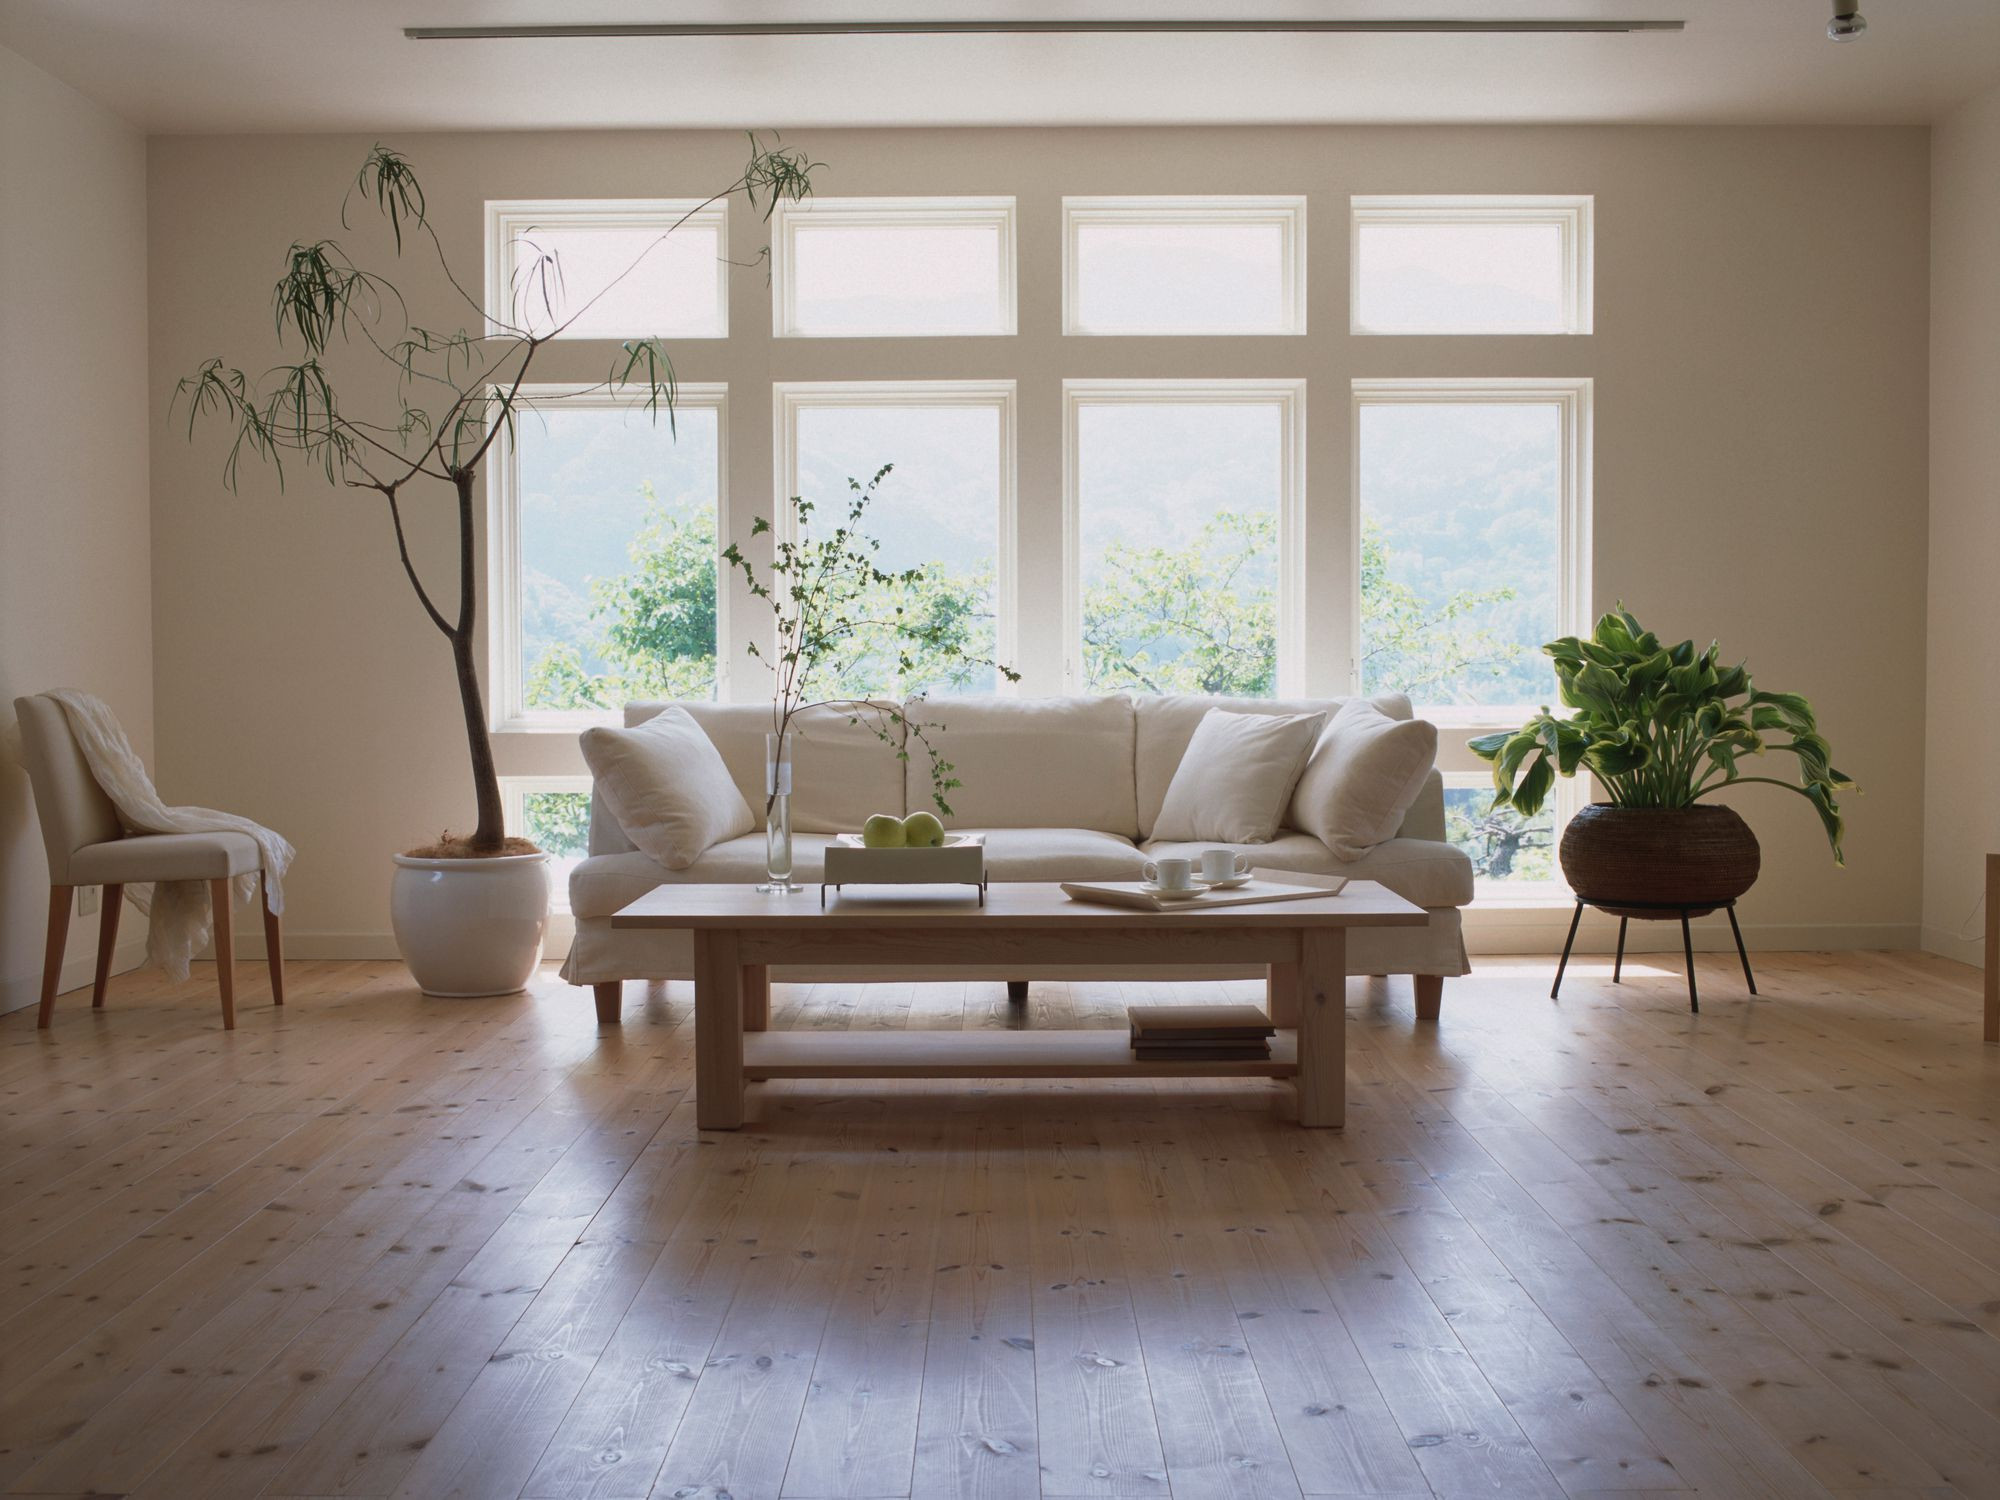 29 Recommended Pros and Cons Of Laminate Flooring Versus Hardwood 2024 free download pros and cons of laminate flooring versus hardwood of laminate flooring pros and cons throughout living room laminate floor gettyimages dexph070 001 58b5cc793df78cdcd8be2938